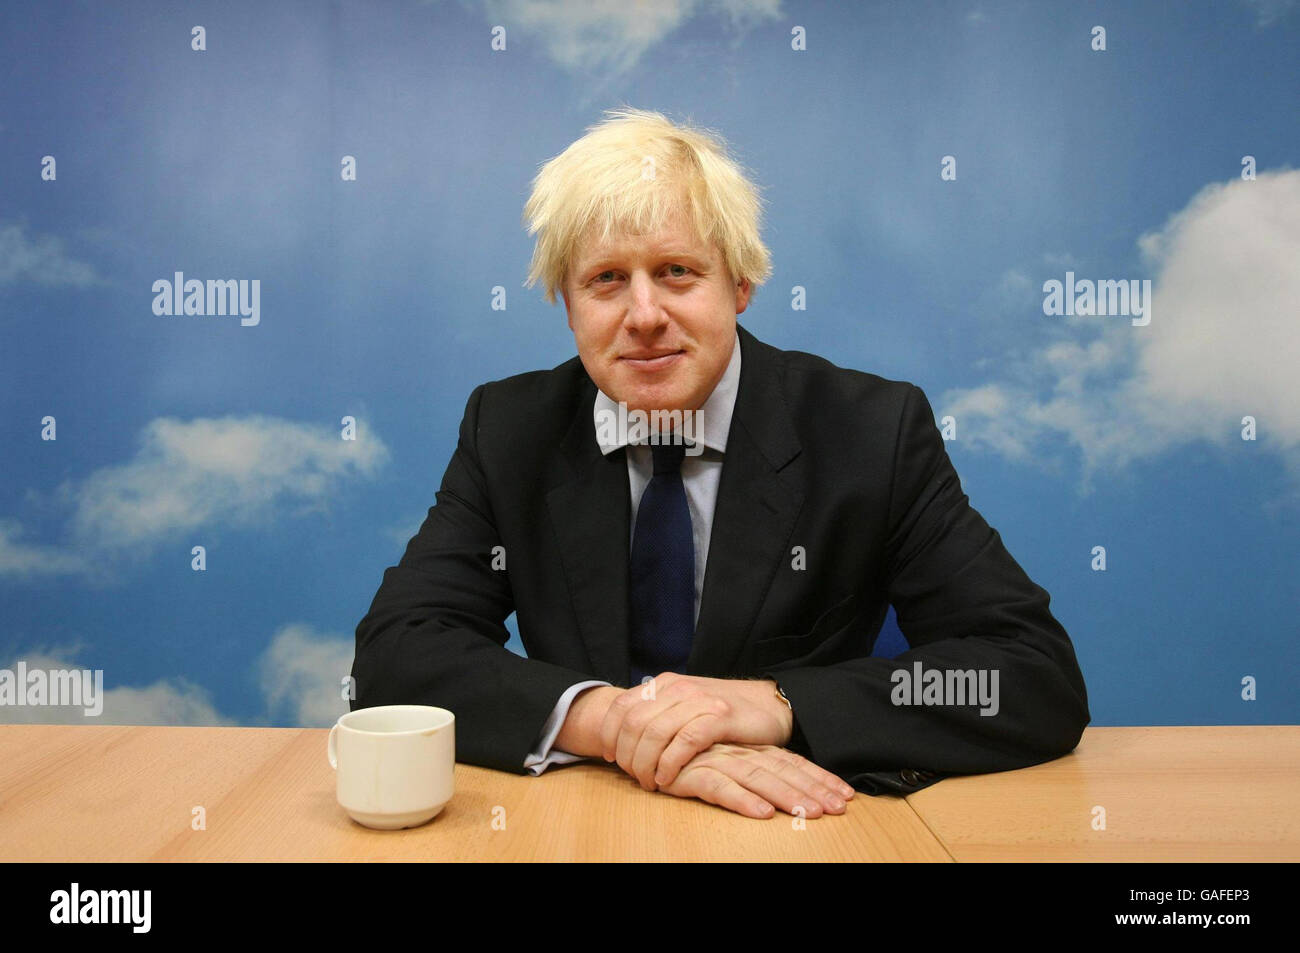 The Conservative Candidate for Mayor of London Boris Johnson, announces his proposal to reform the existing London Health Commission and ring-fence London's spending on public health at the Ideas Space in central London. Stock Photo